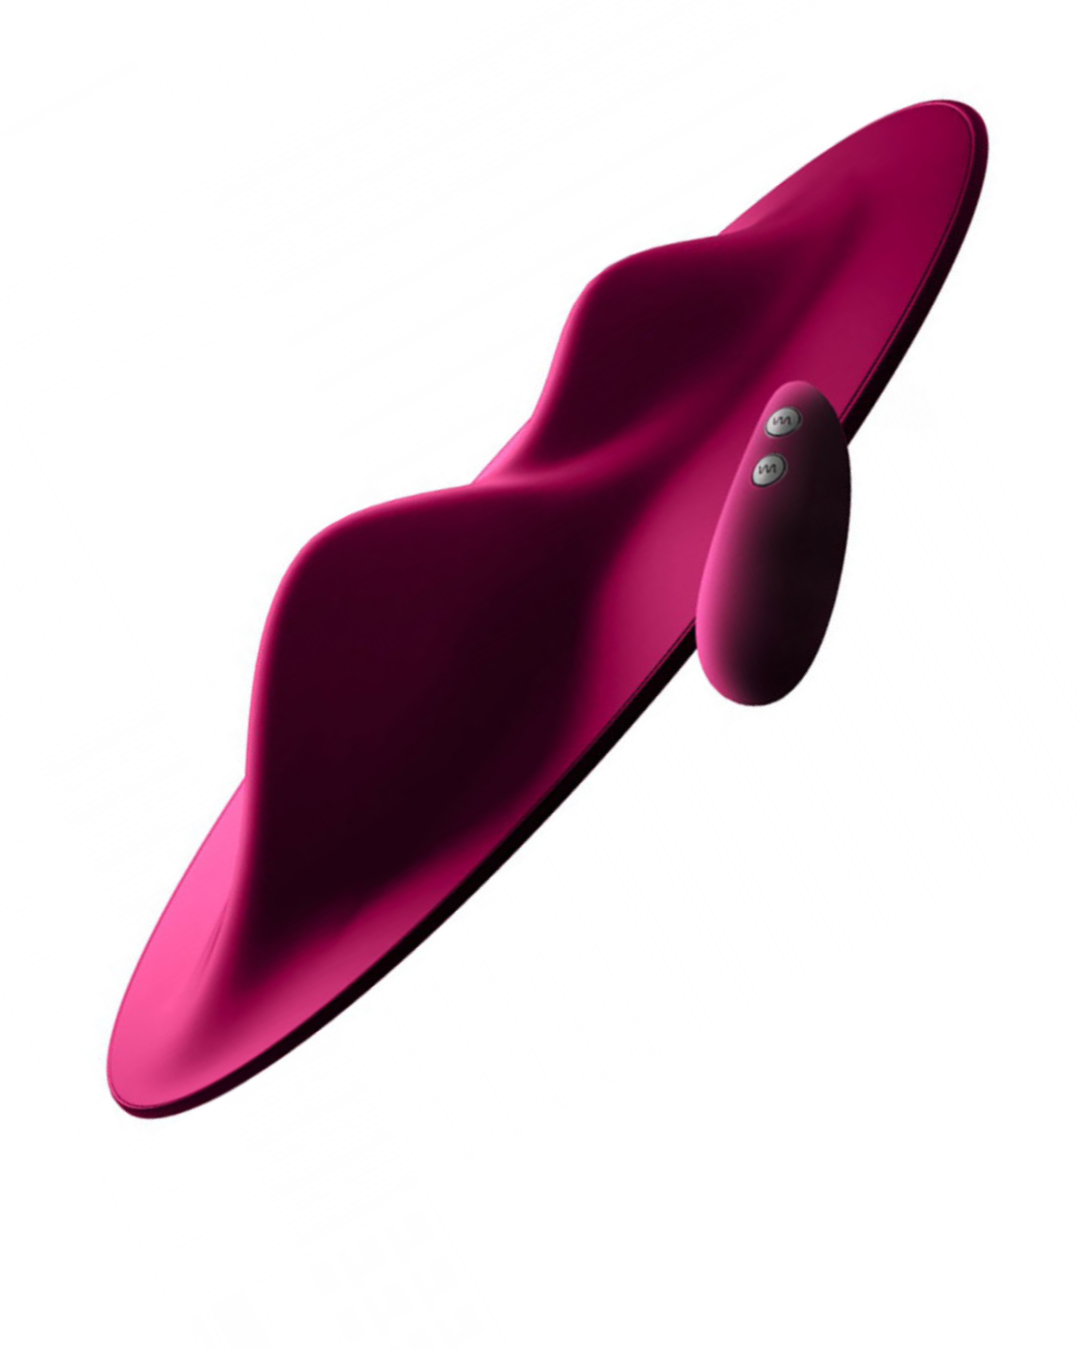 VibePad Ride On Hands-Free Humping Vibrator side view with remote